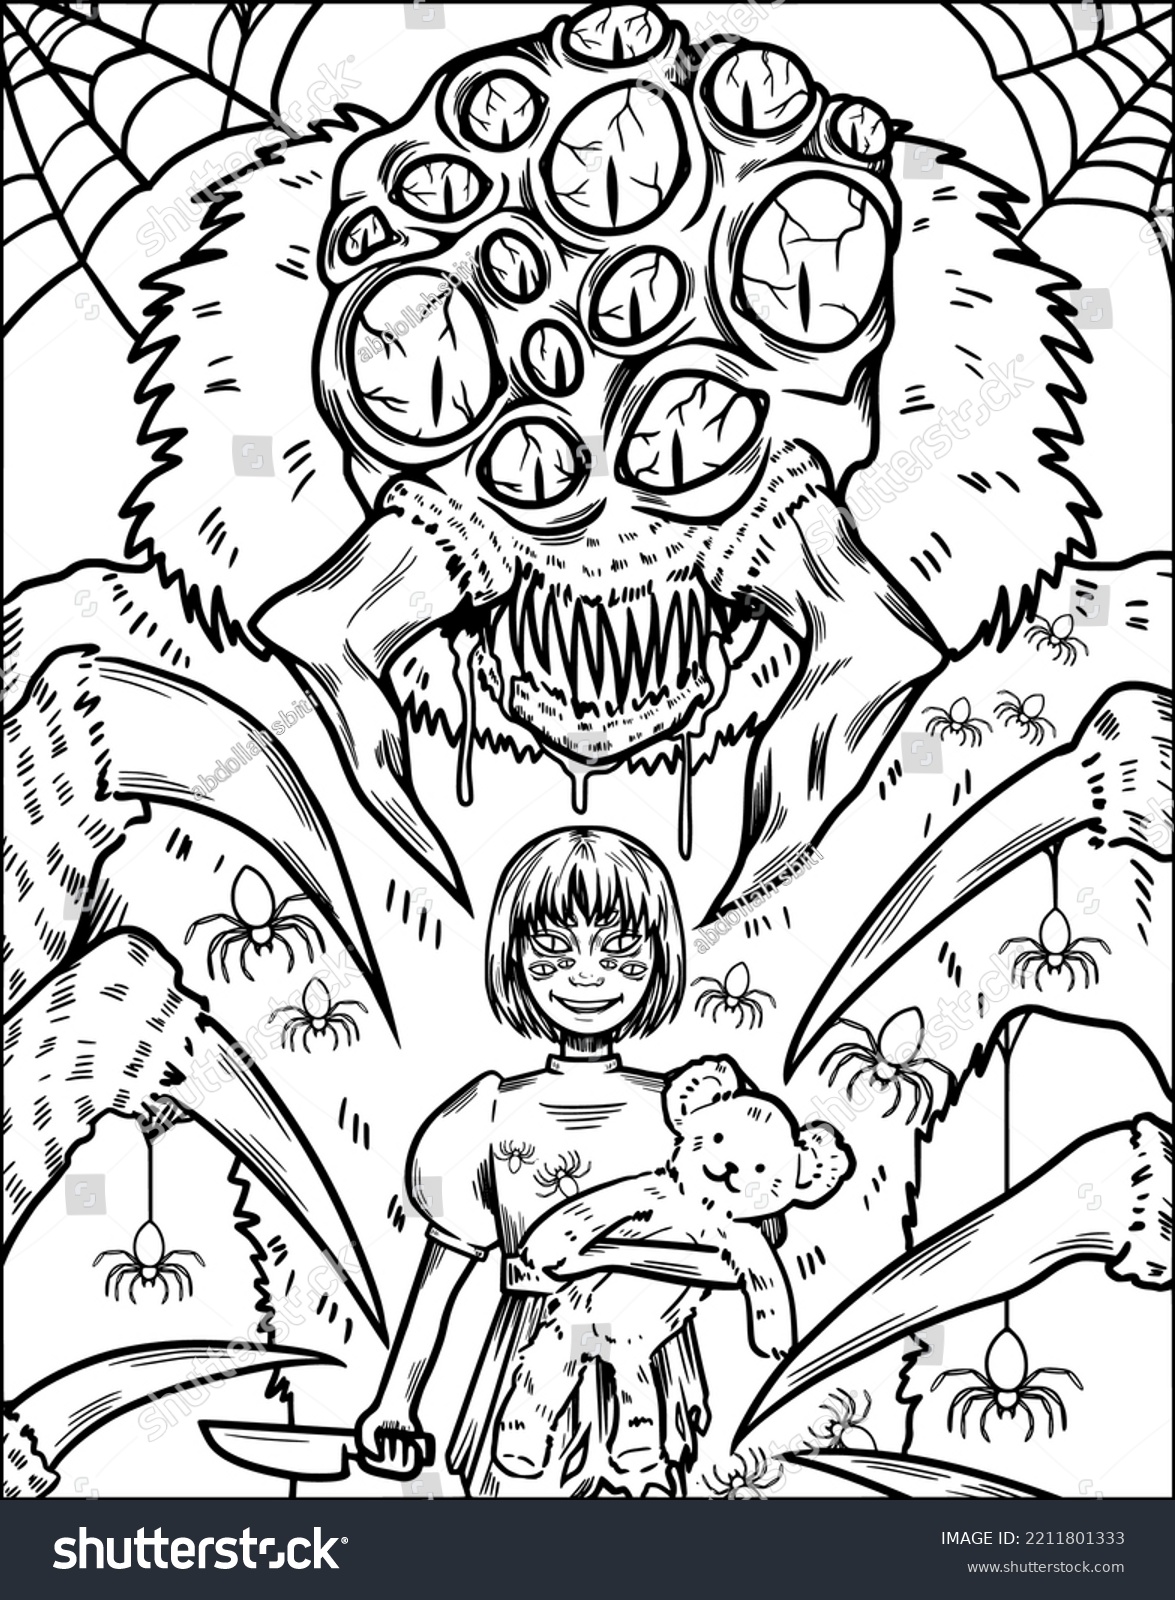 Adult coloring page spider images stock photos d objects vectors